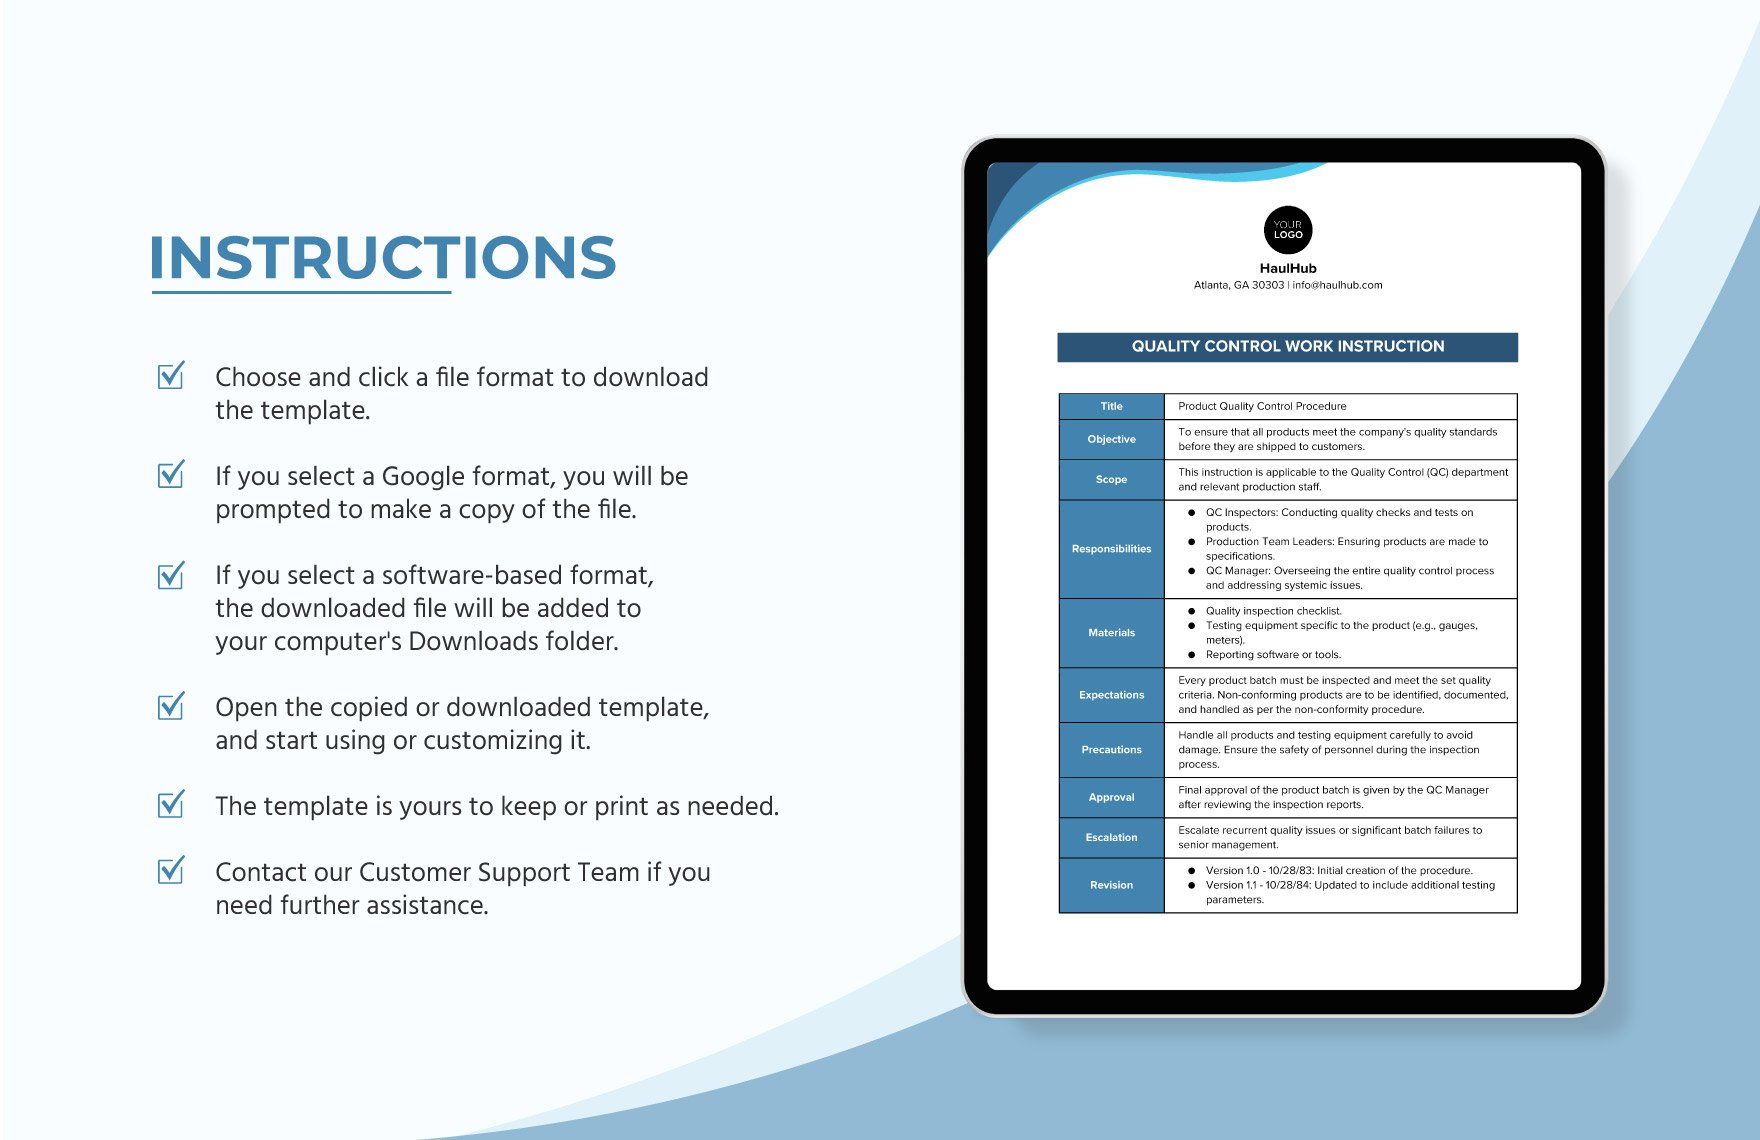 Quality Control Work Instruction Template